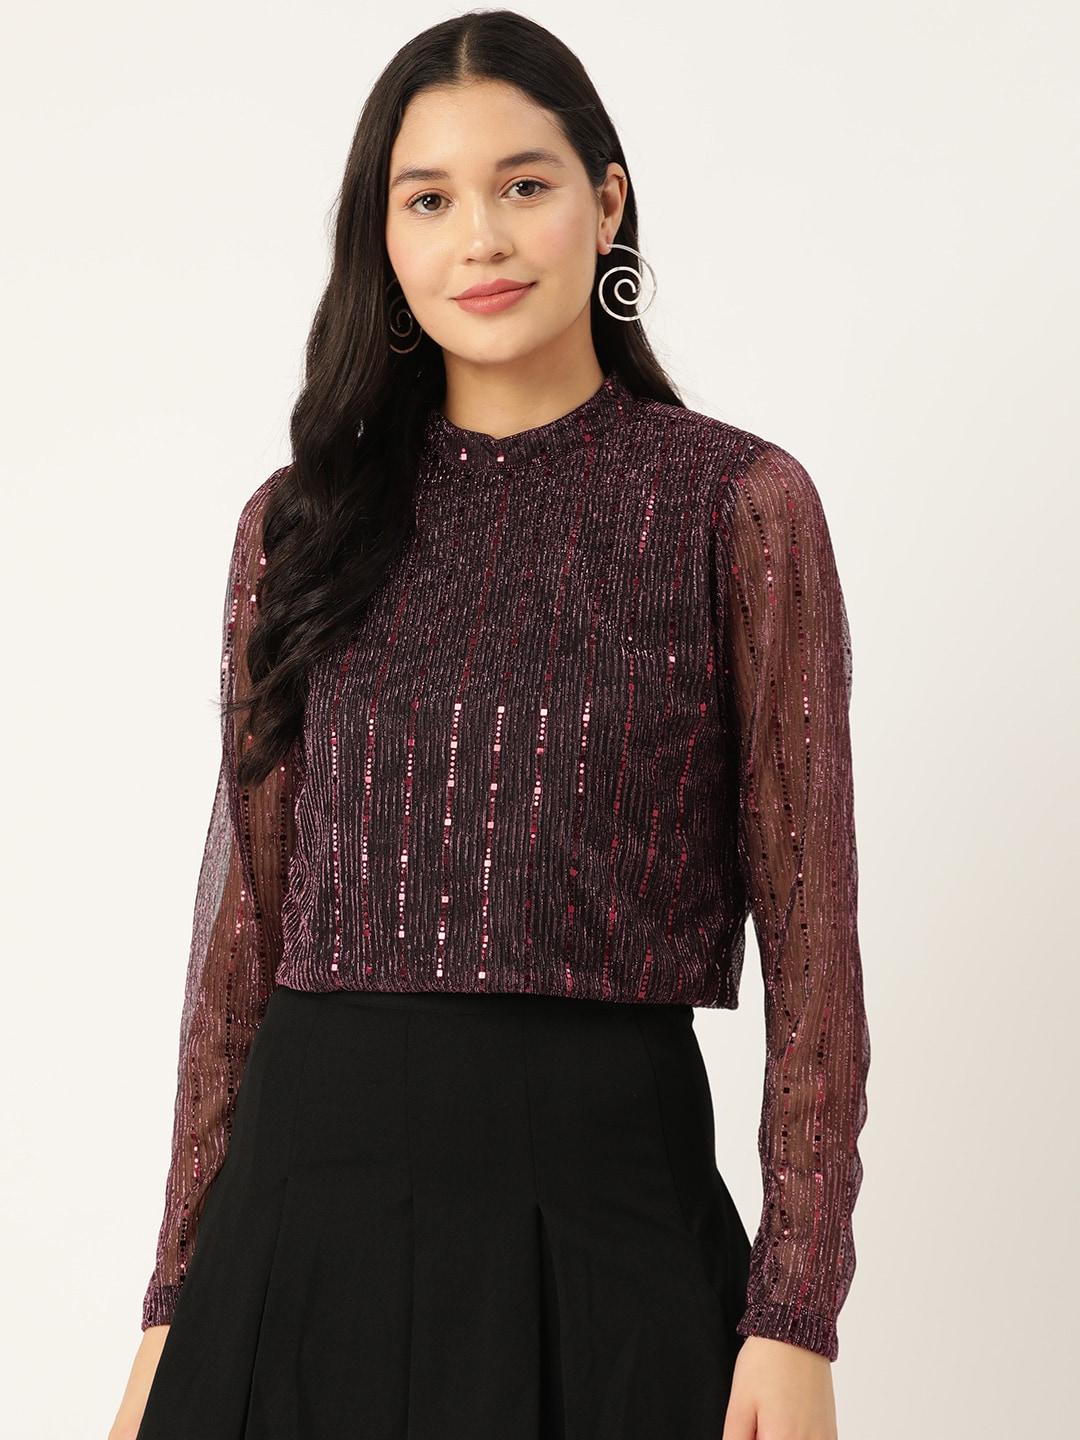 rue-collection-embellished-boxy-crop-top